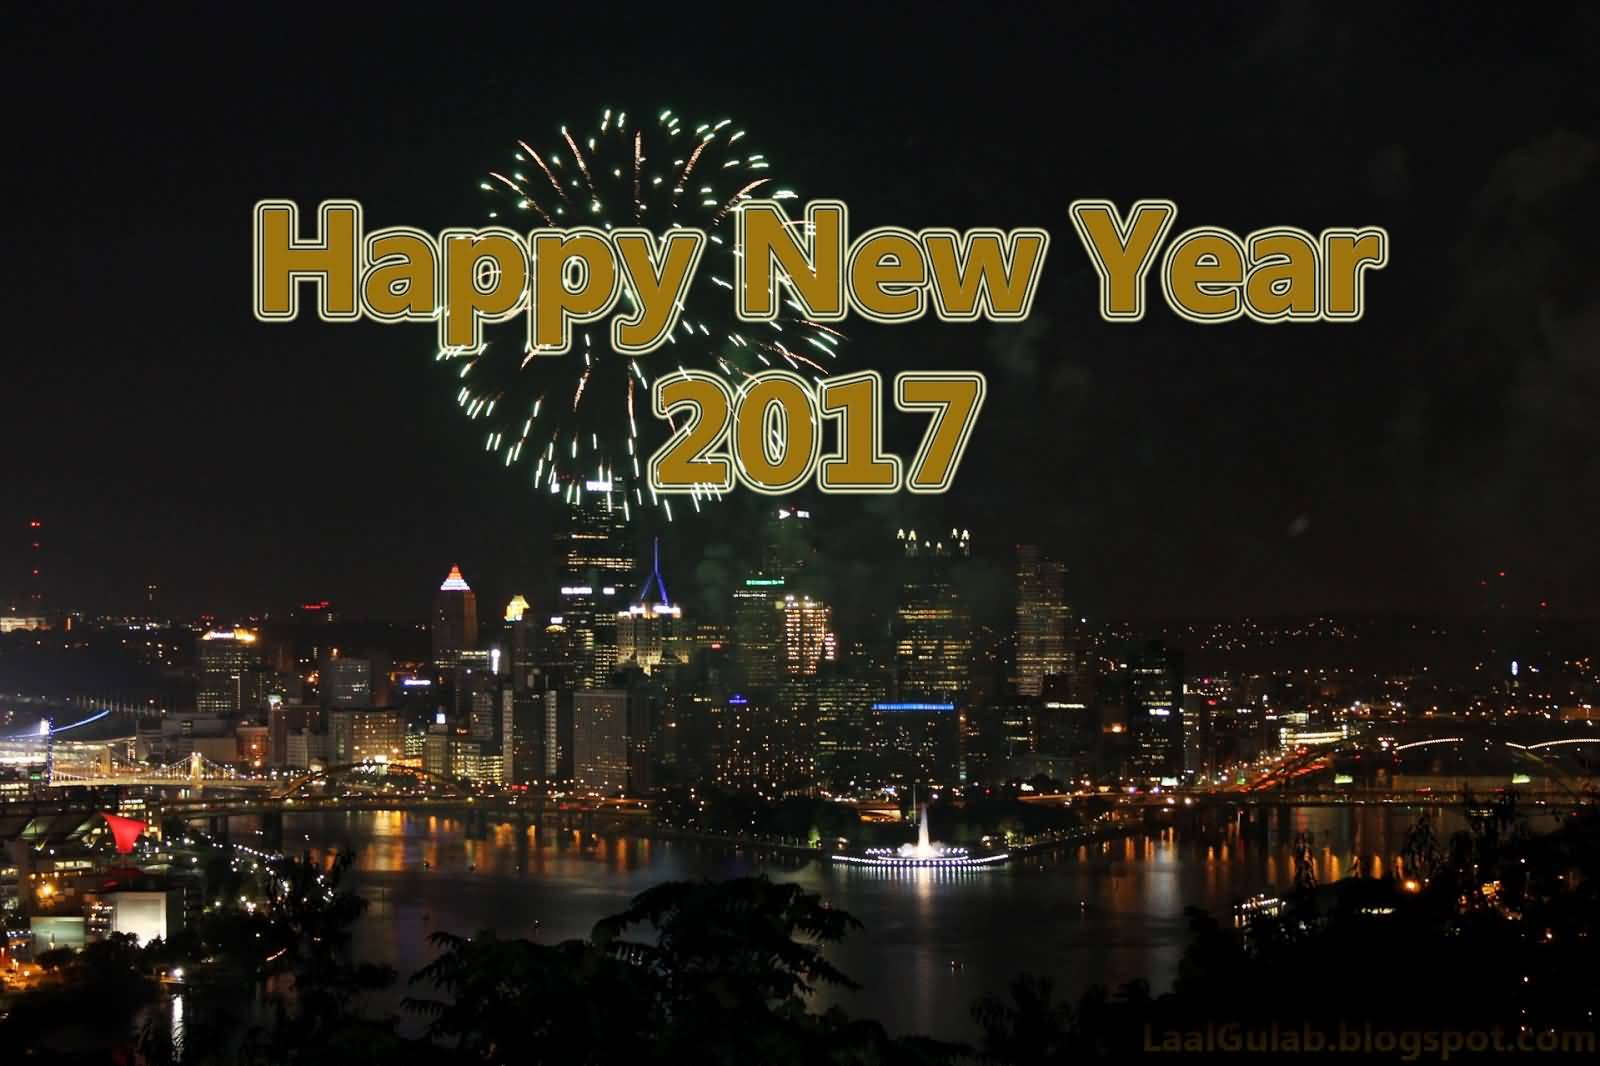 Happy New Year 2017 Fireworks Over The City